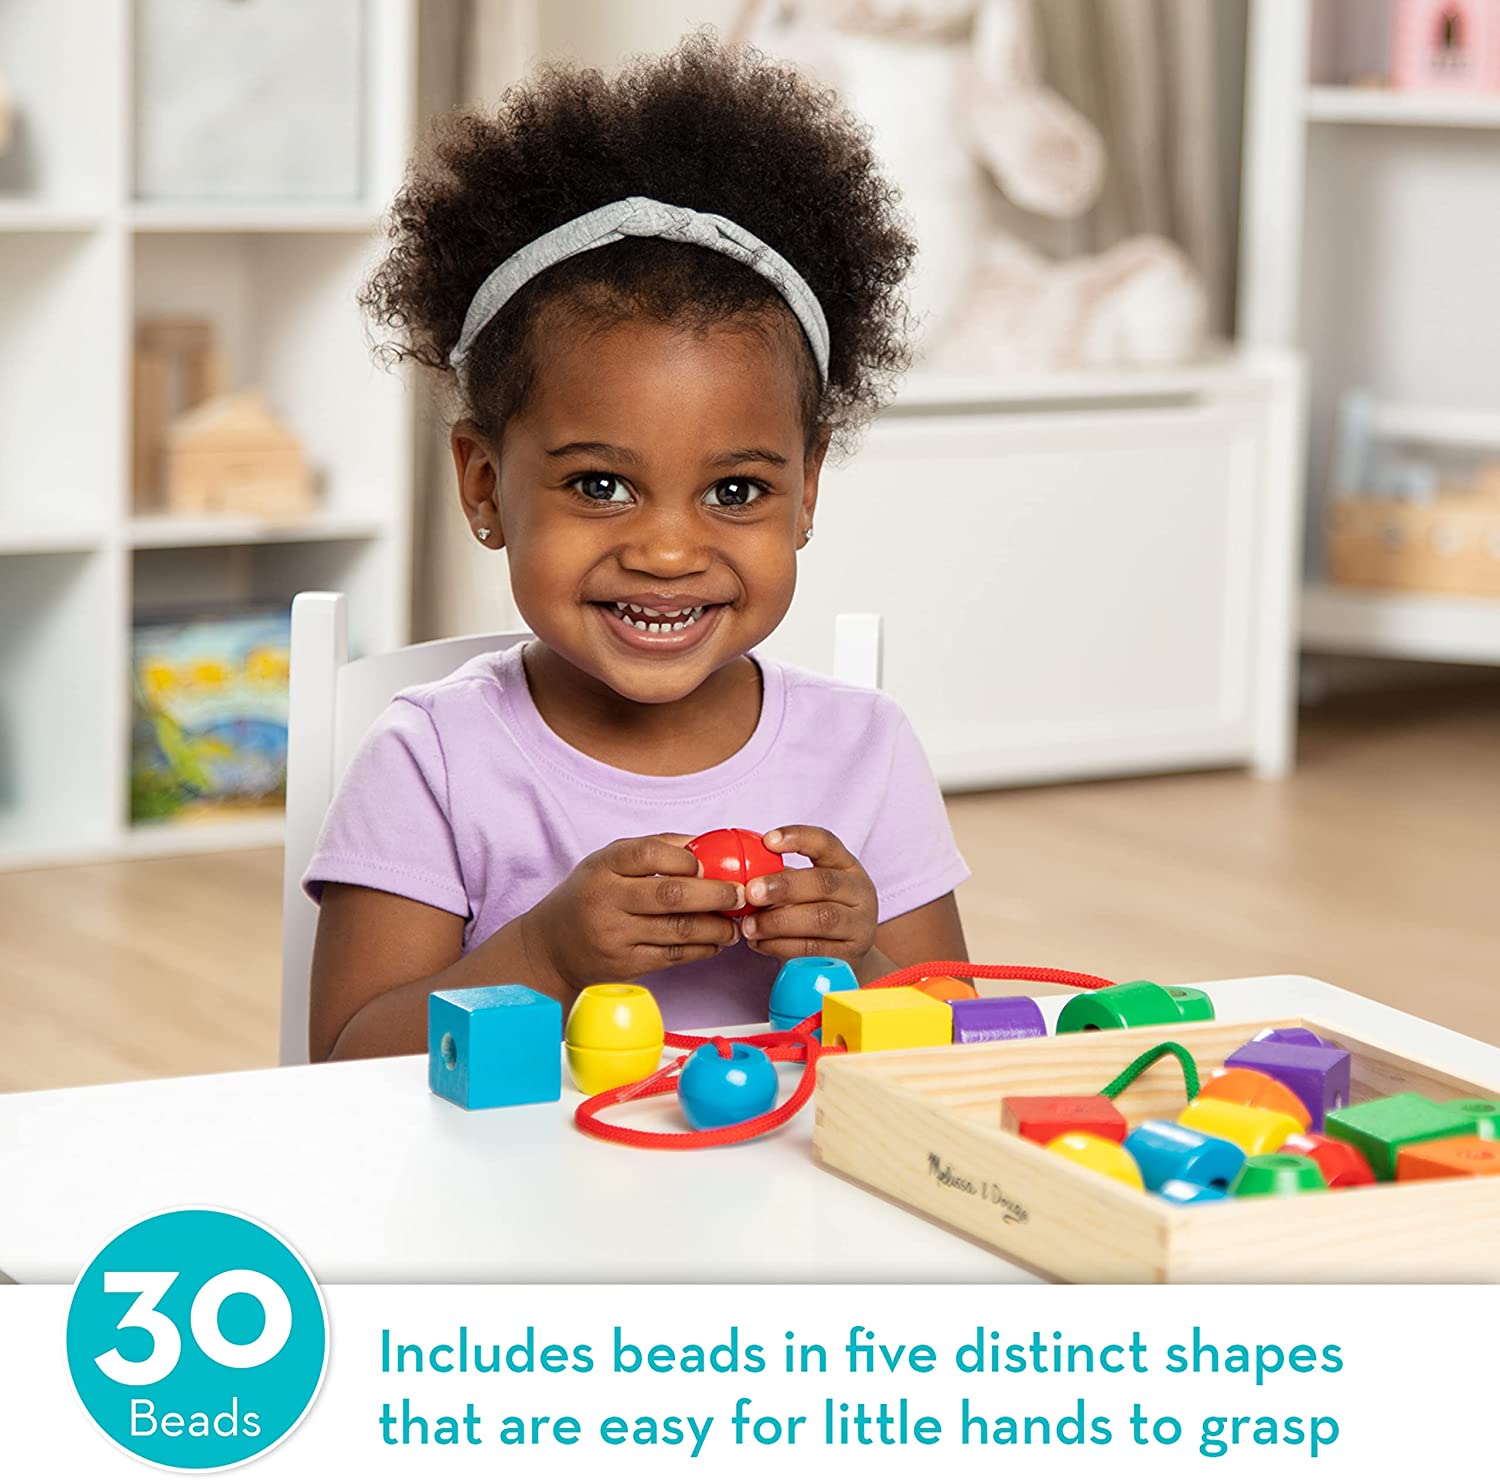 Melissa & Doug Primary Lacing Beads – Educational Toy With 30 Wooden Beads and 2 Laces – Beads For Toddlers, Fine Motor Skills Lacing Toys For Toddlers And Kids Ages 3+